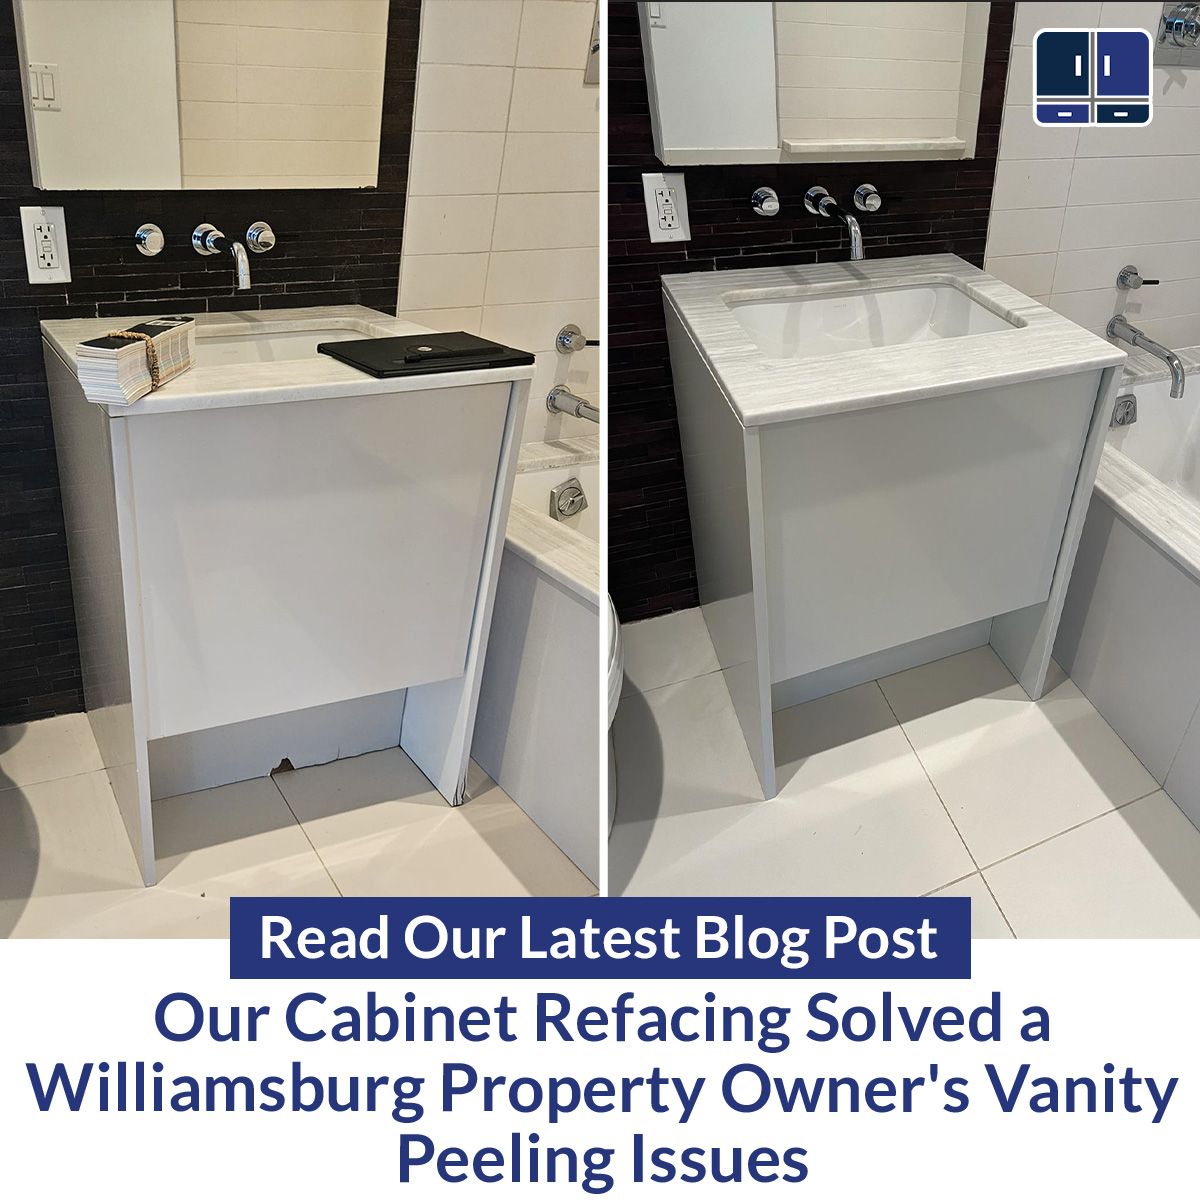 Our Cabinet Refacing Solved a Williamsburg Property Owner's Vanity Peeling Issues